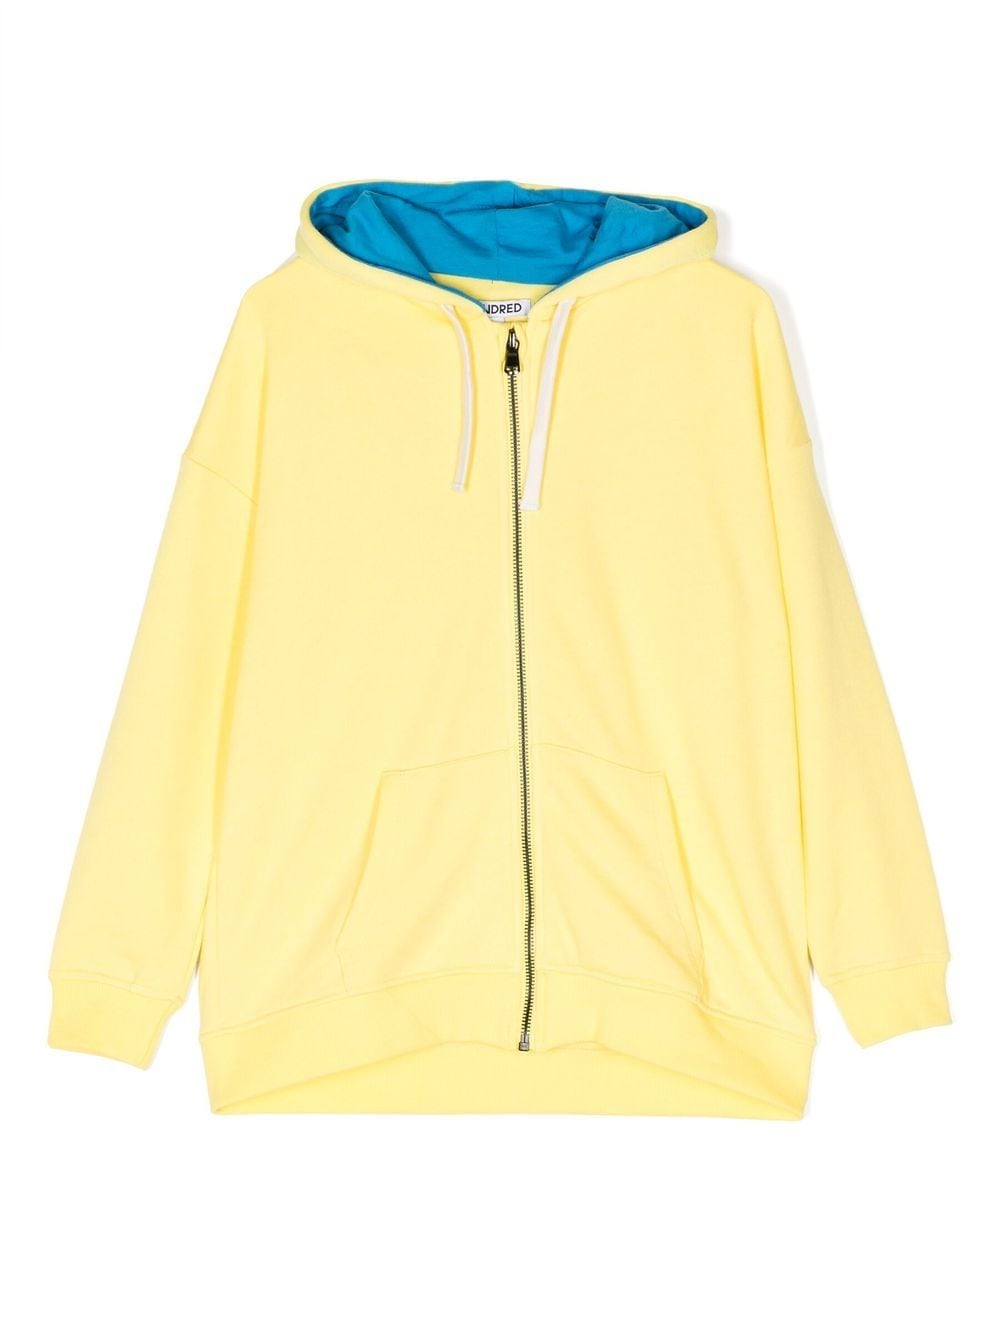 KINDRED drawstring hood jacket - Yellow von KINDRED